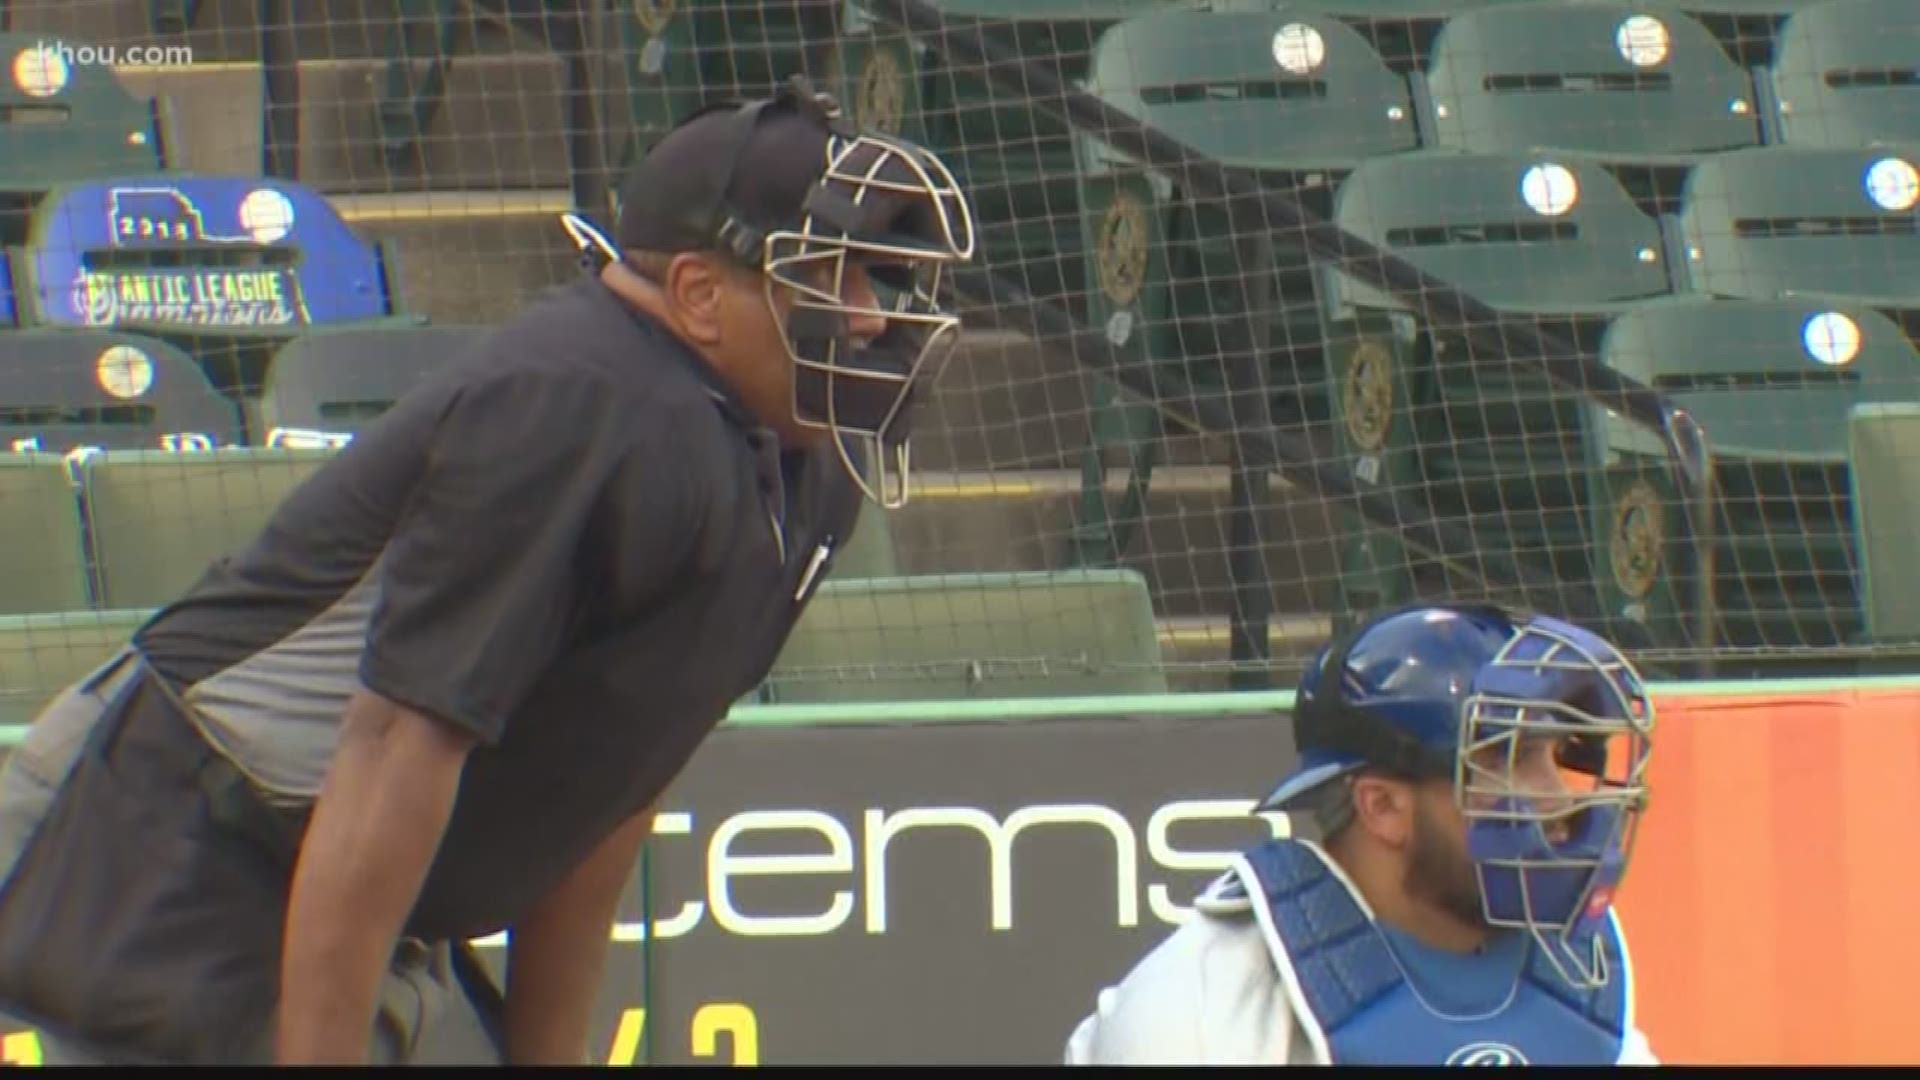 The Sugar Land Skeeters are testing new technology that allows computers to determine balls and strikes during professional baseball games.